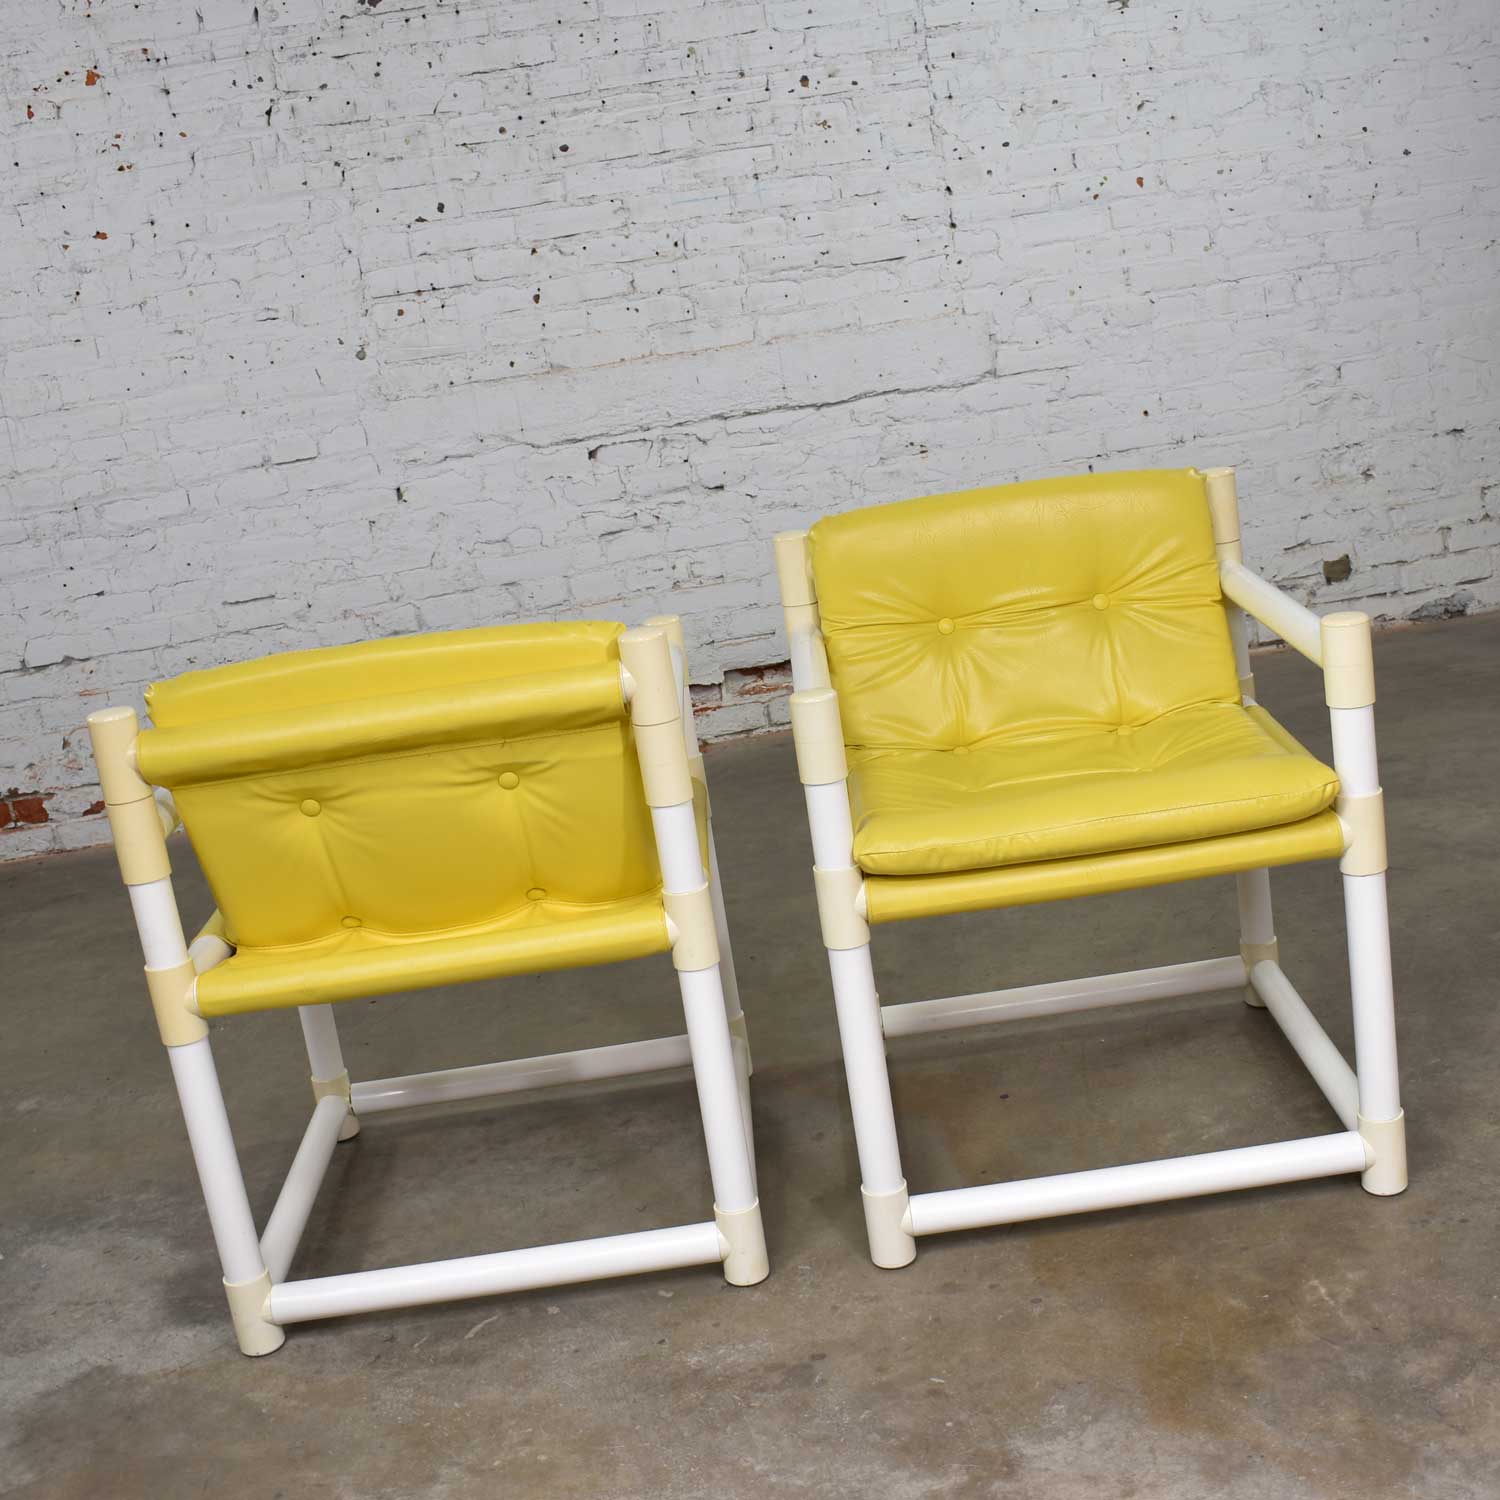 Pair MCM Outdoor PVC Side Chairs Yellow Vinyl Upholstery by Decorion Fun Furnishings .